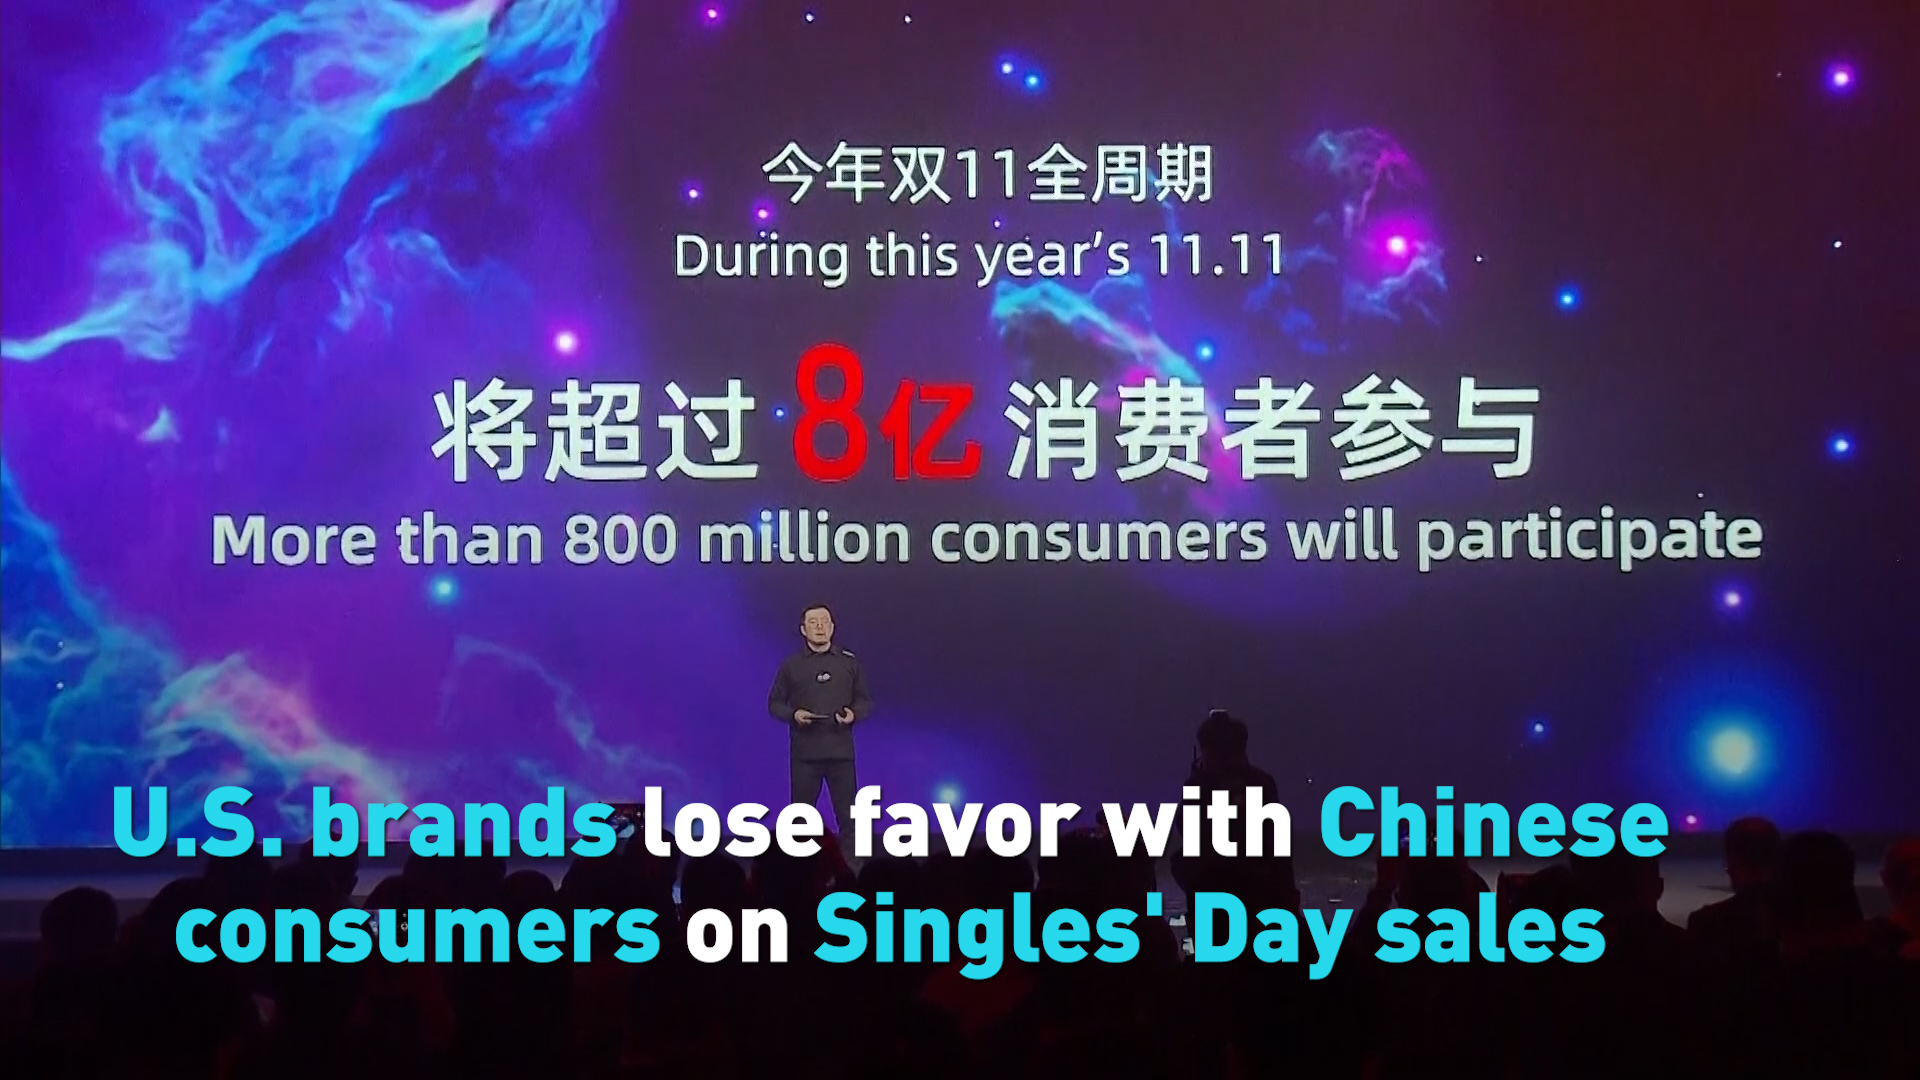 U.S. brands lose favor with Chinese consumers on Singles’ Day sales